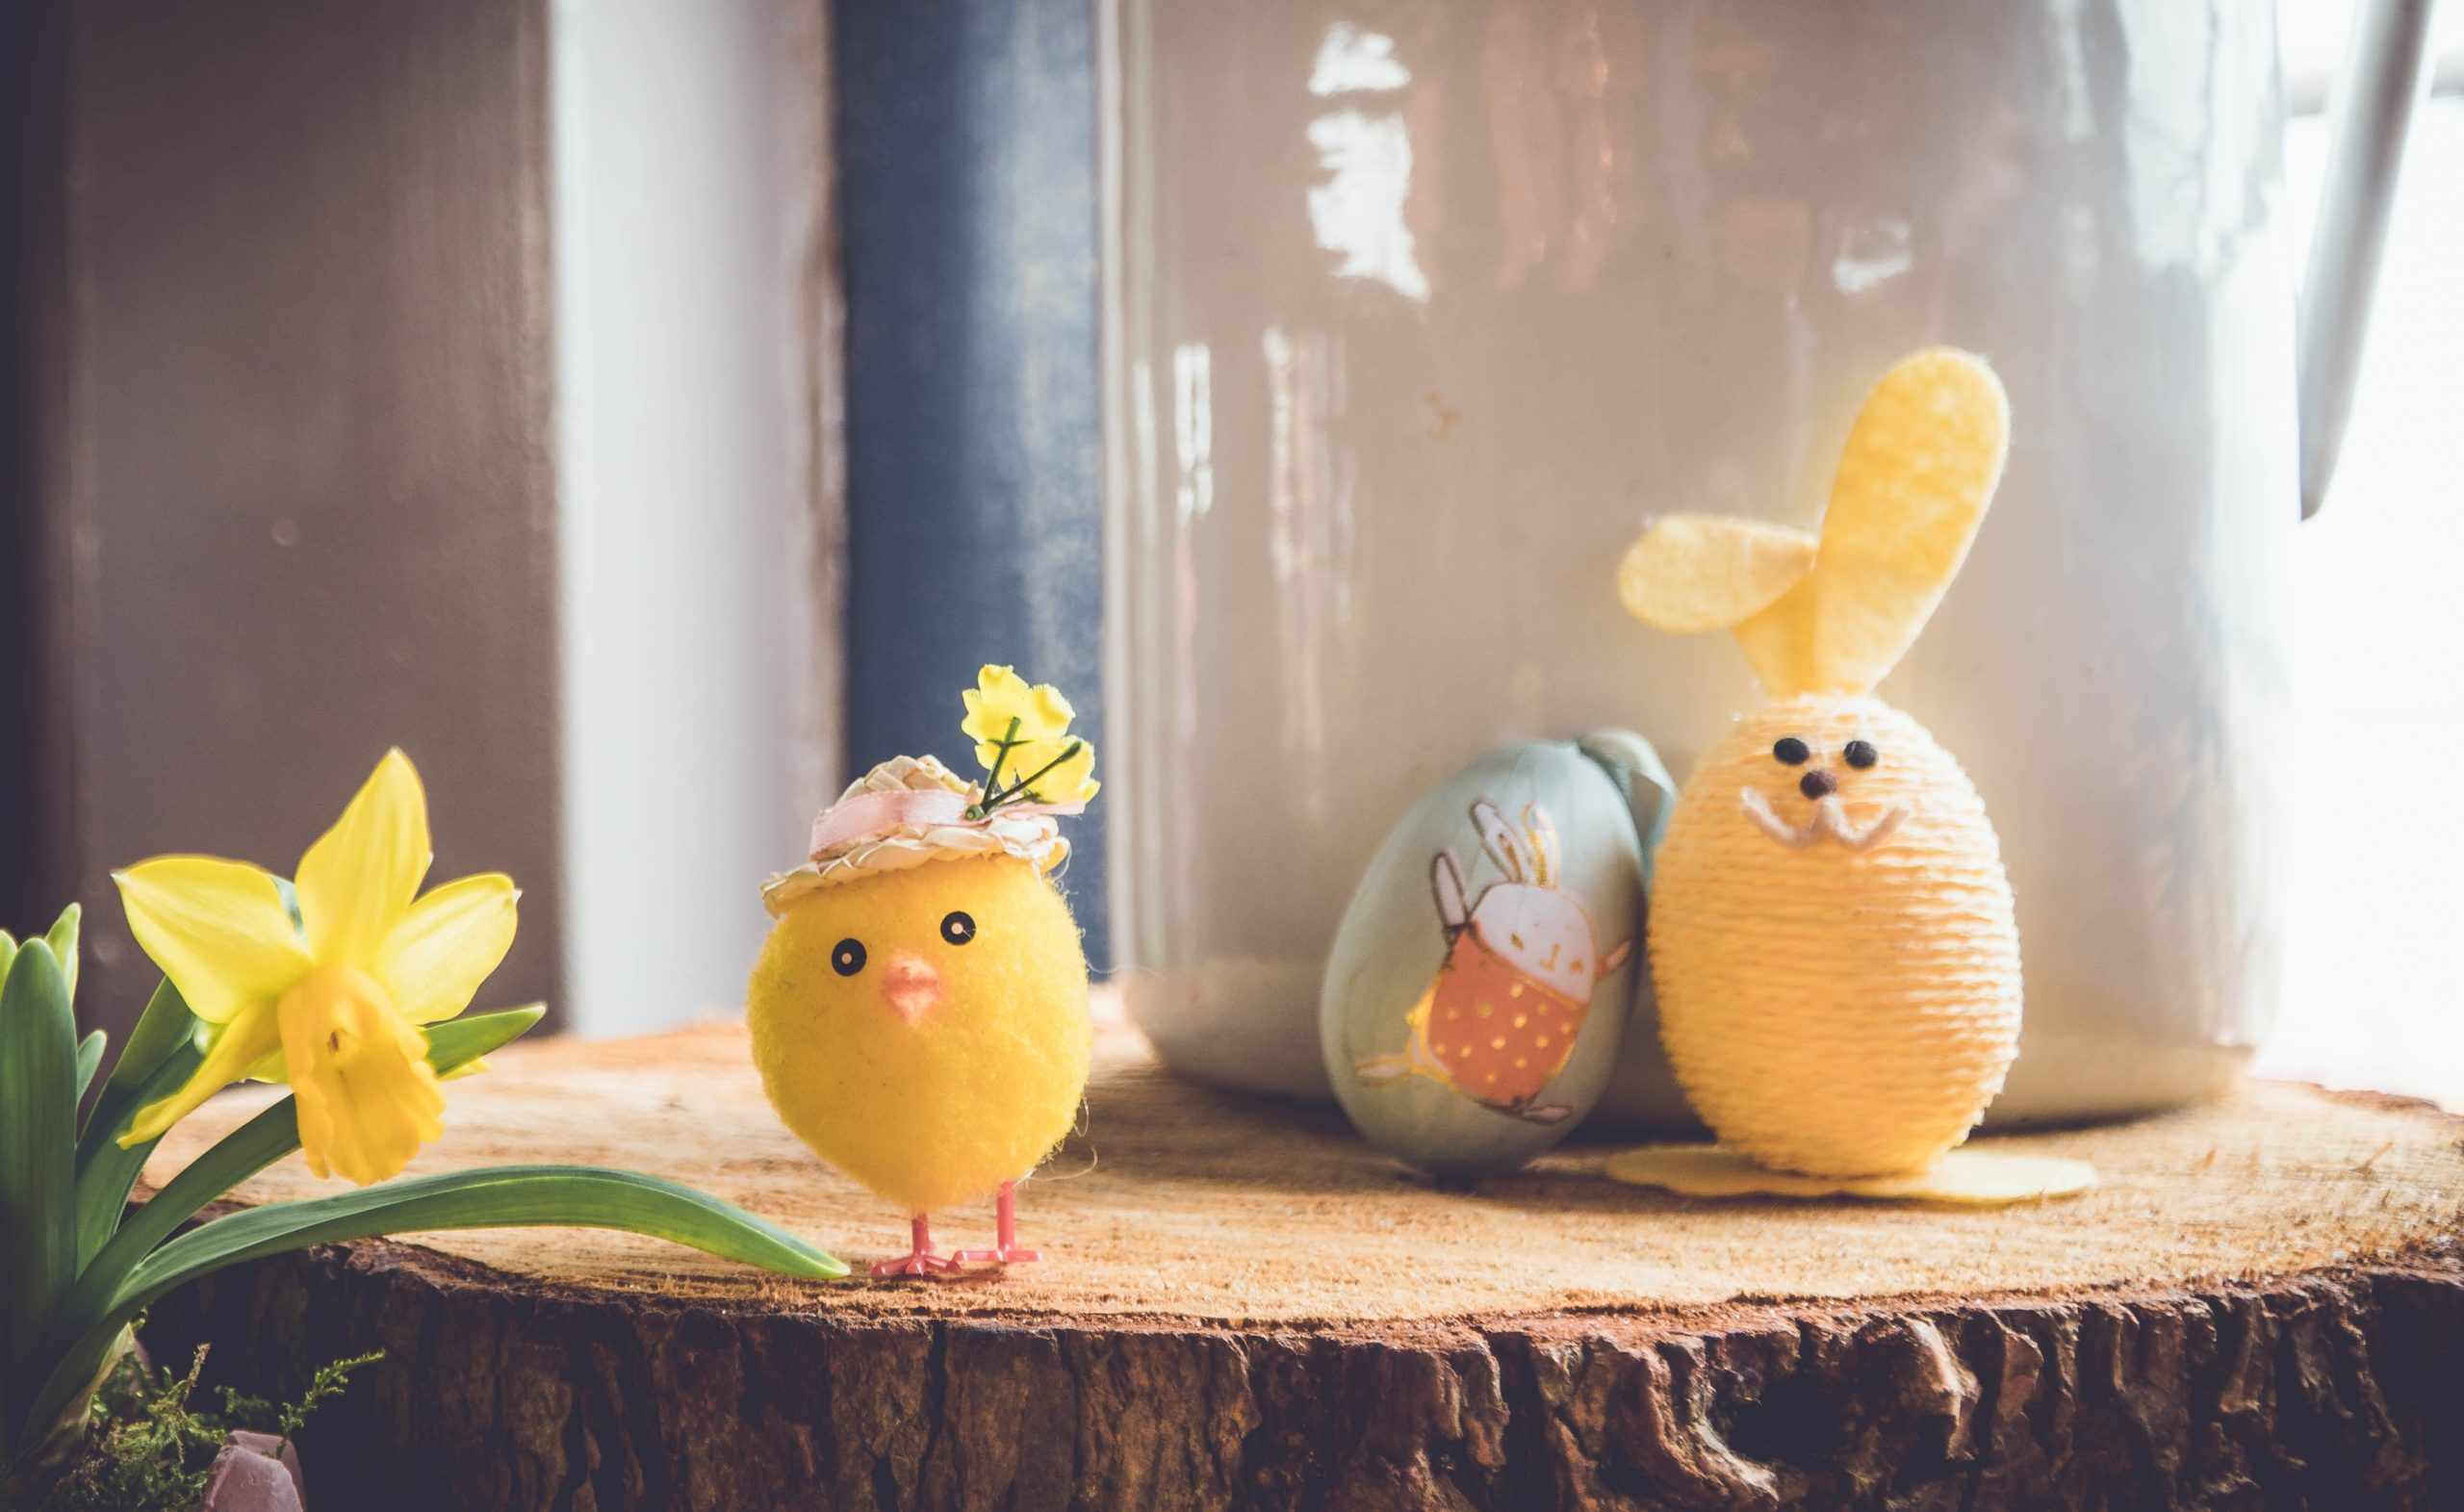 How to celebrate an RV Easter